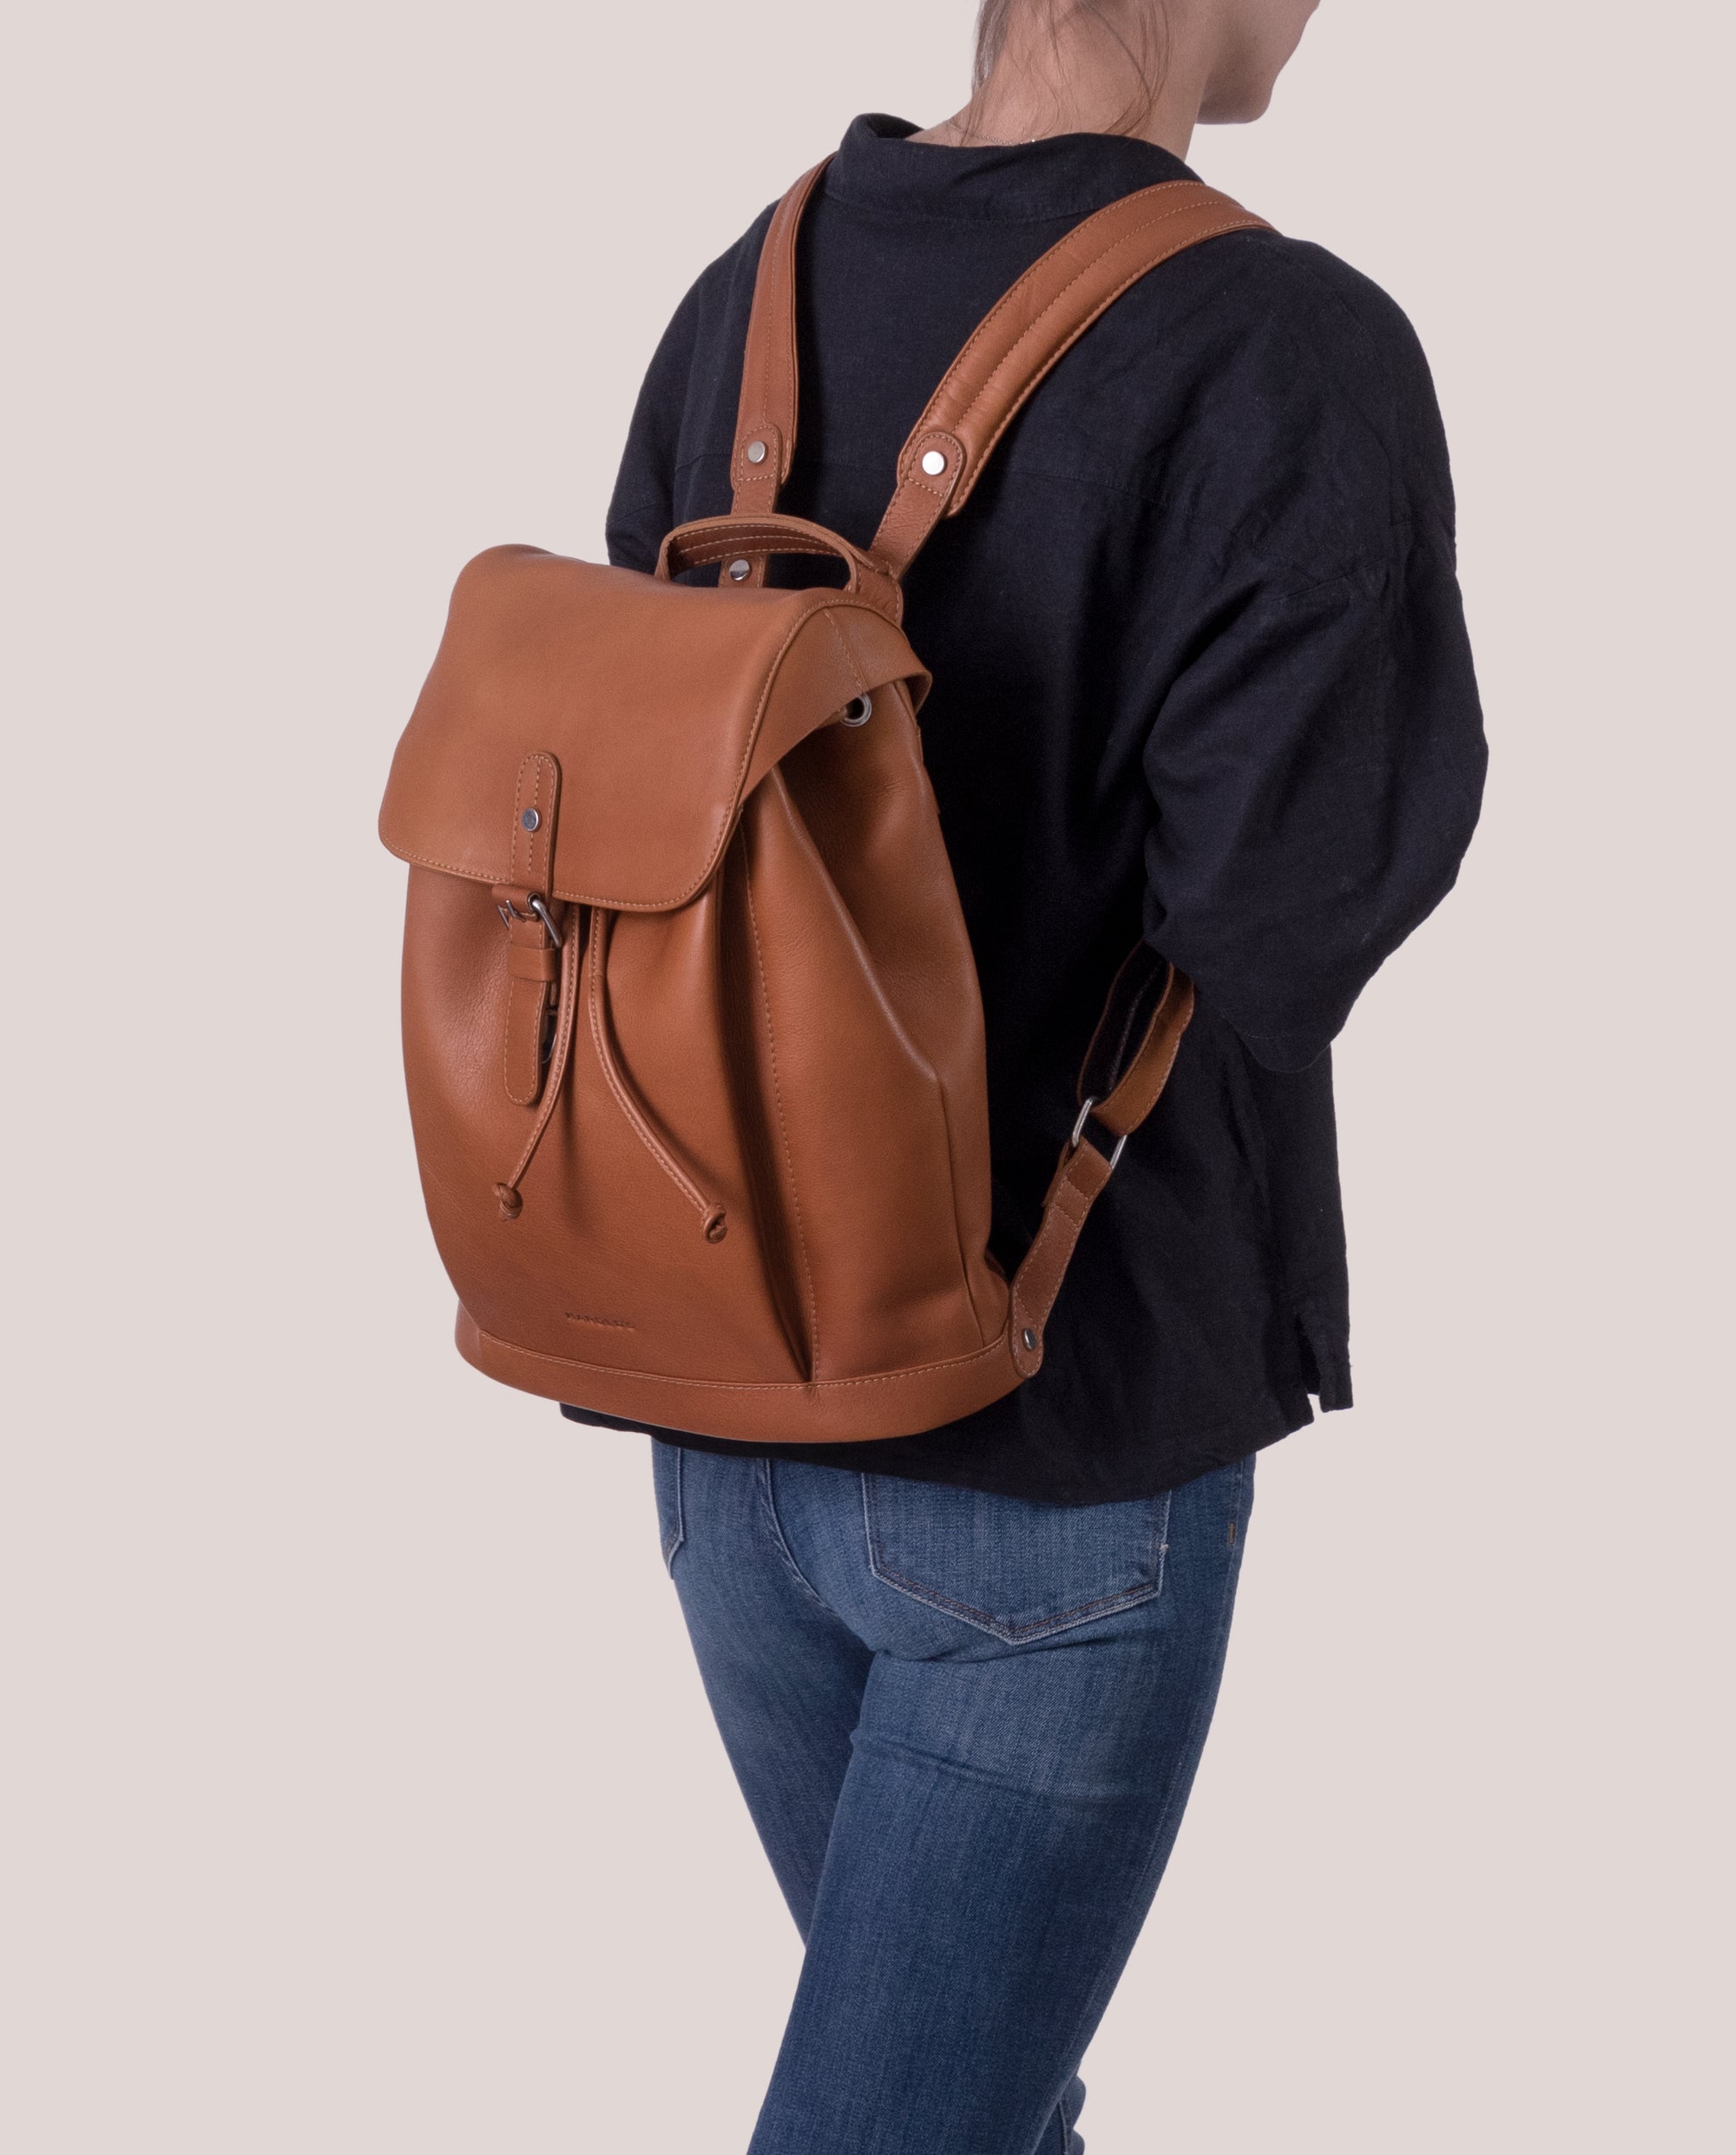 Campo Backpack M